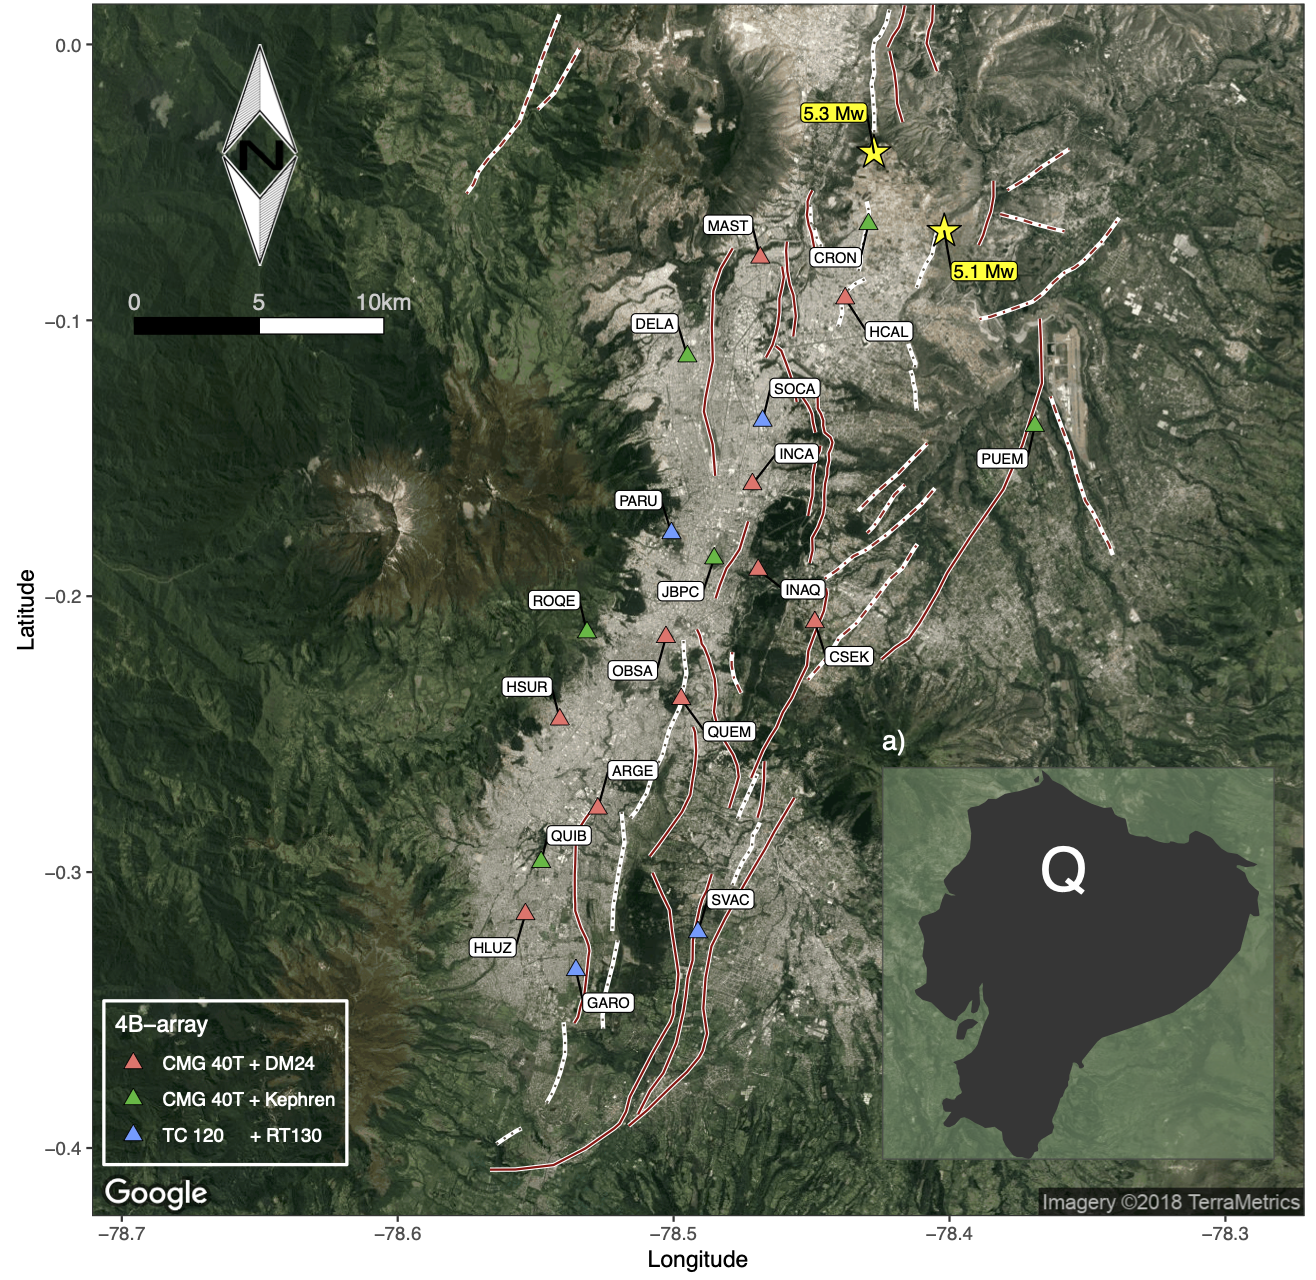 Map of Quito showing the location of the fault traces and the temporary seismic network used to study the basin structure (modified from Pacheco et al., 2021).